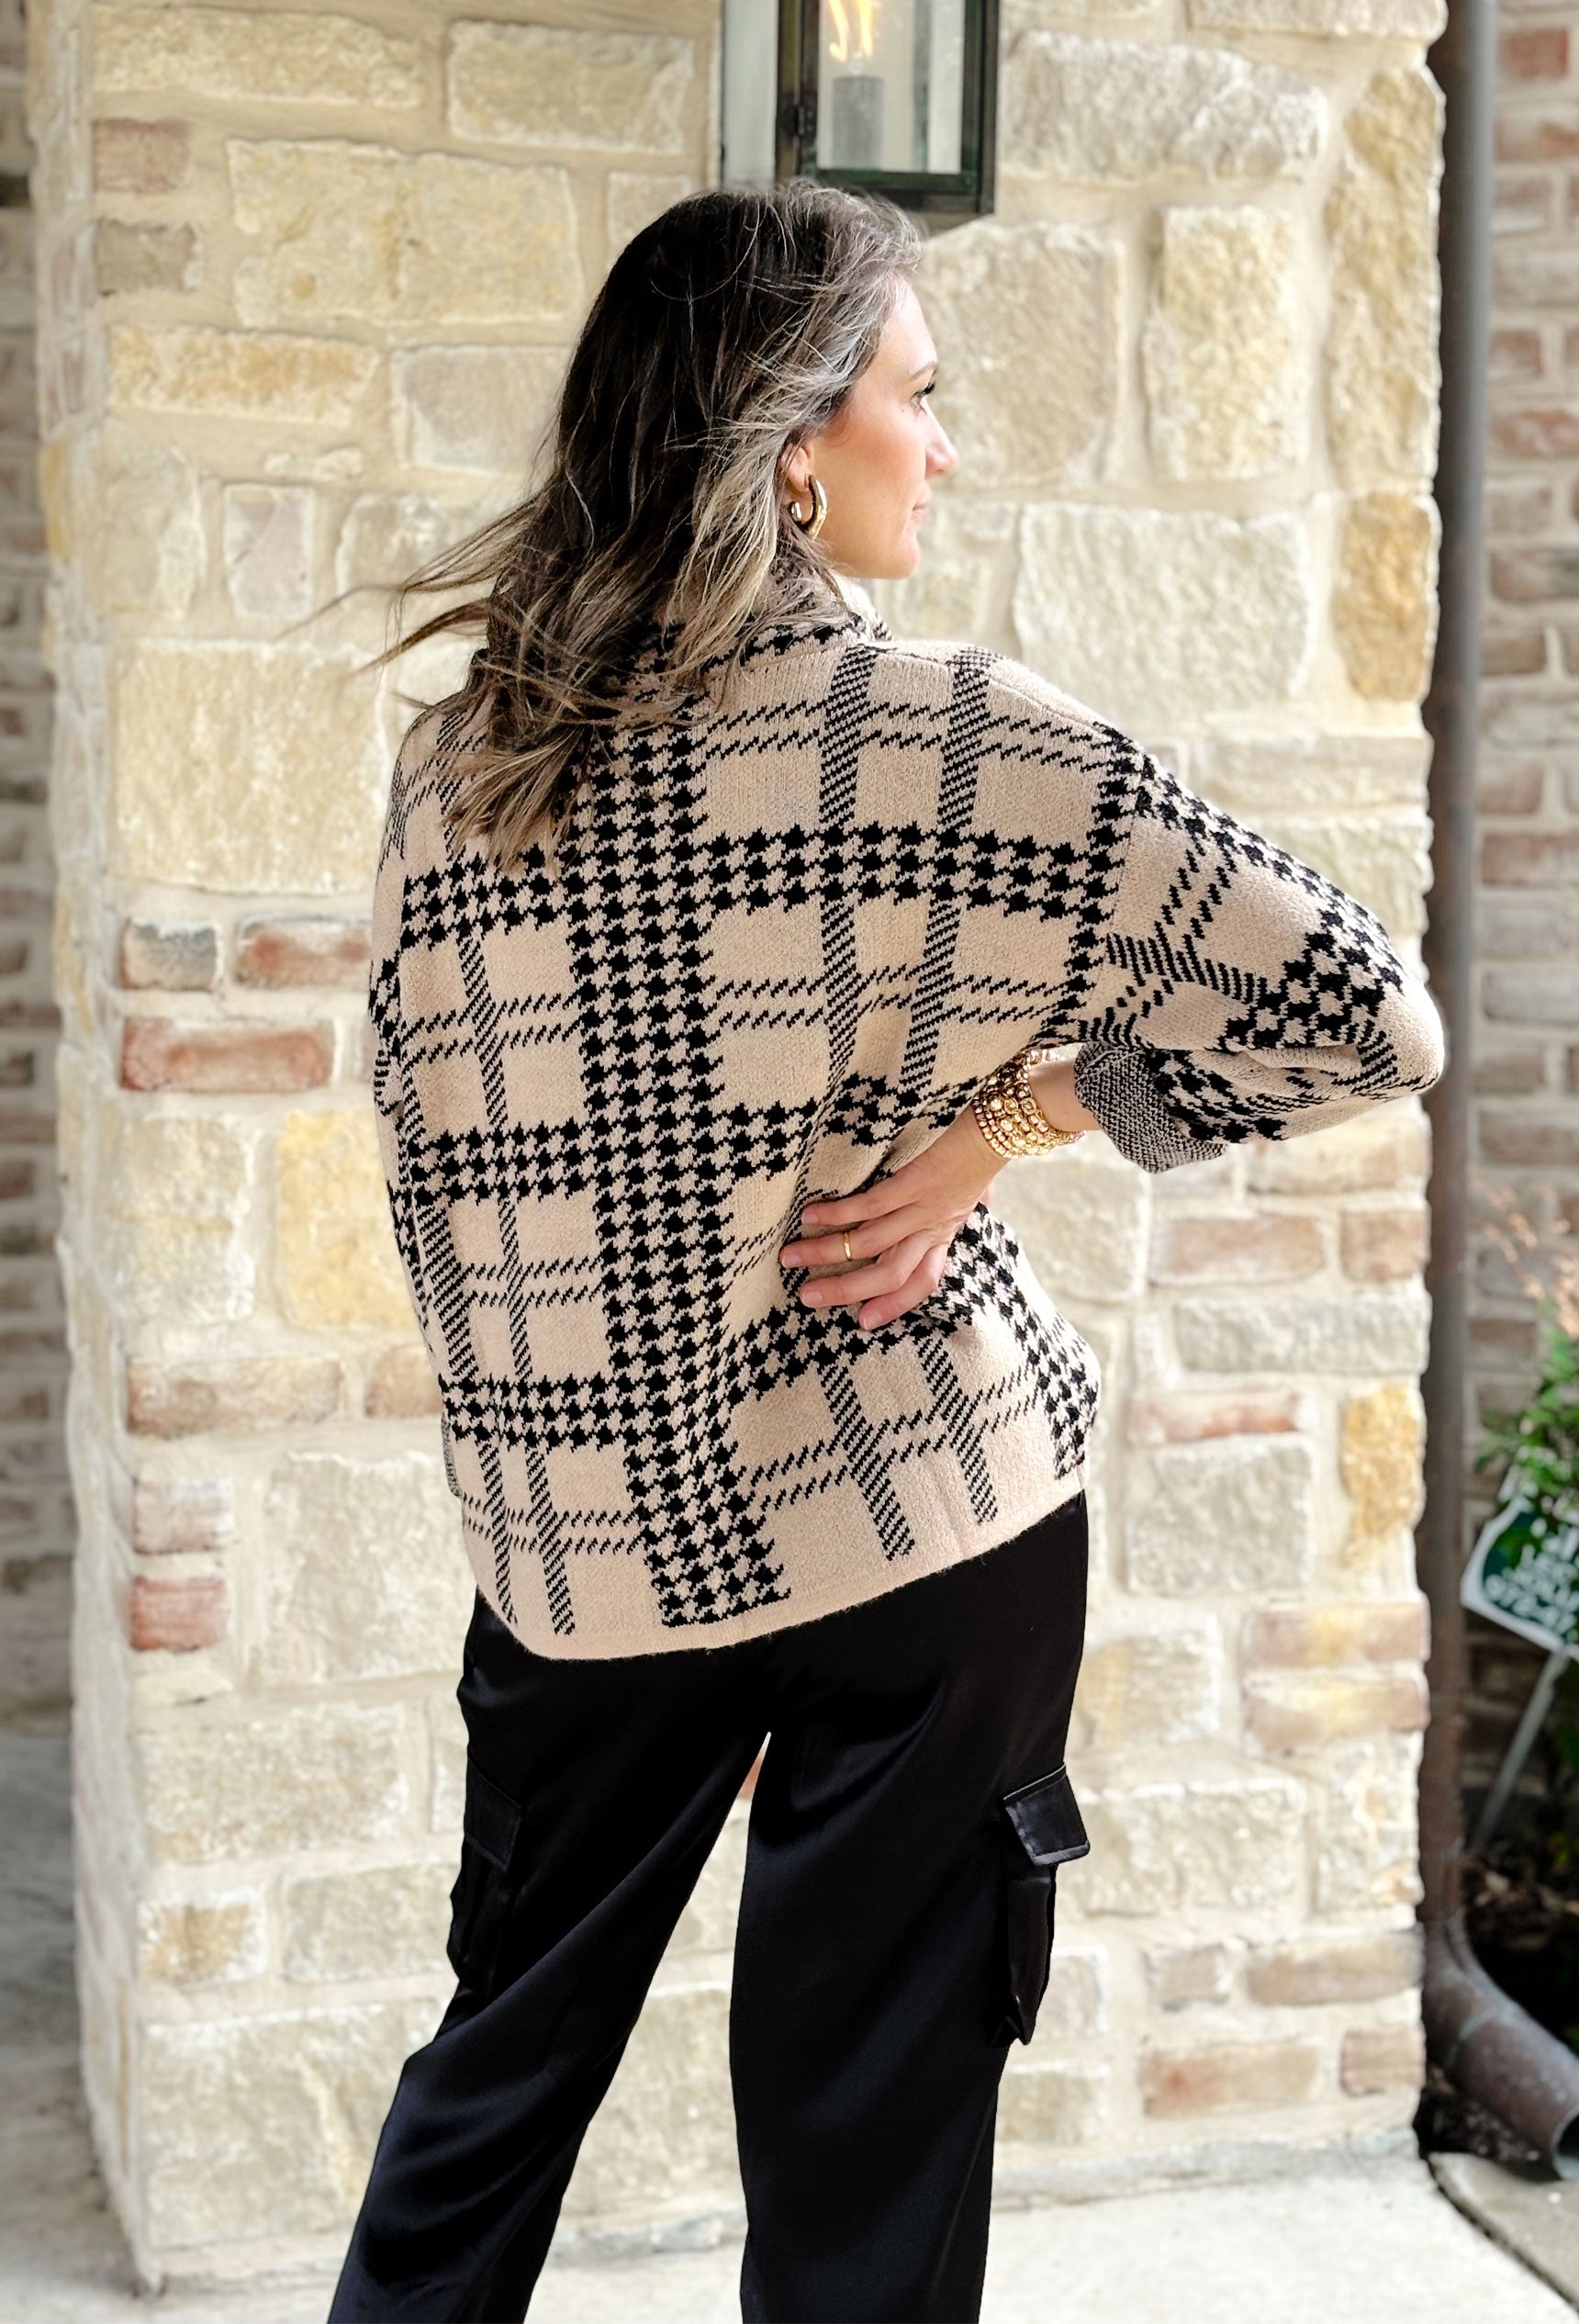 Dreaming Of Soho Houndstooth Sweater, tan and black houndstooth turtle neck sweater